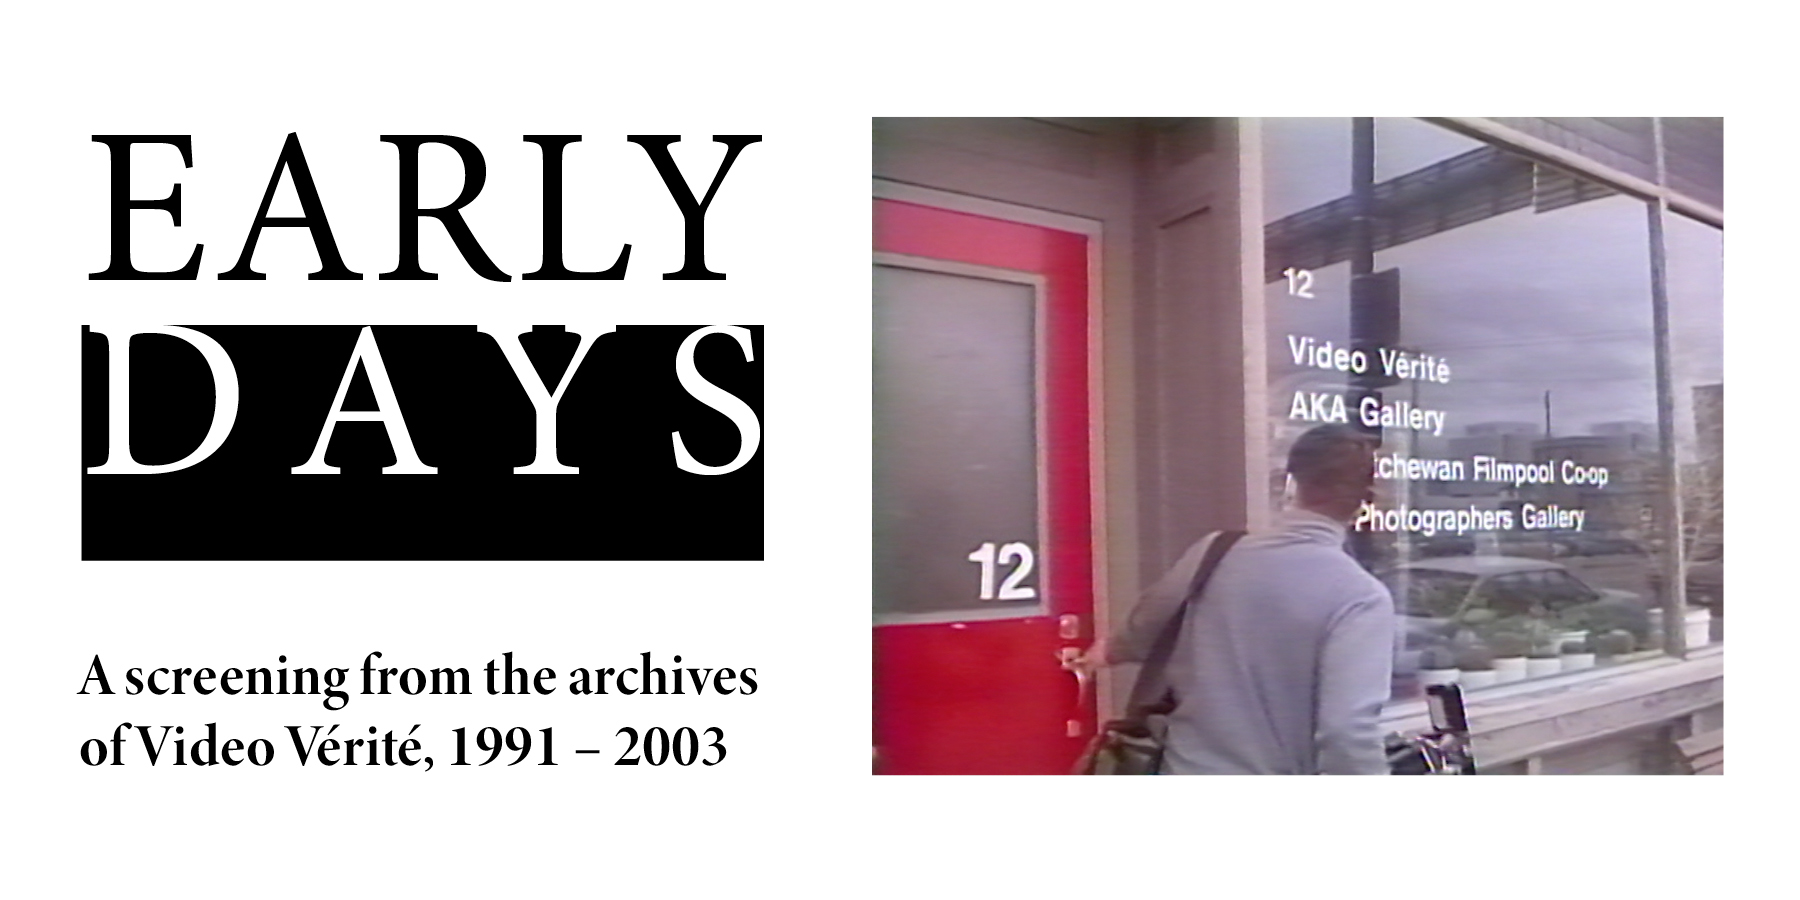 Text reads "Early Days – A screening from the archives of Video Vérité, 1991 – 2003". A photo to the right shows a man opening a red door to a building housing Video Vérité, AKA Gallery, Saskatchewan Film Pool Coop, and The Photographers Gallery.